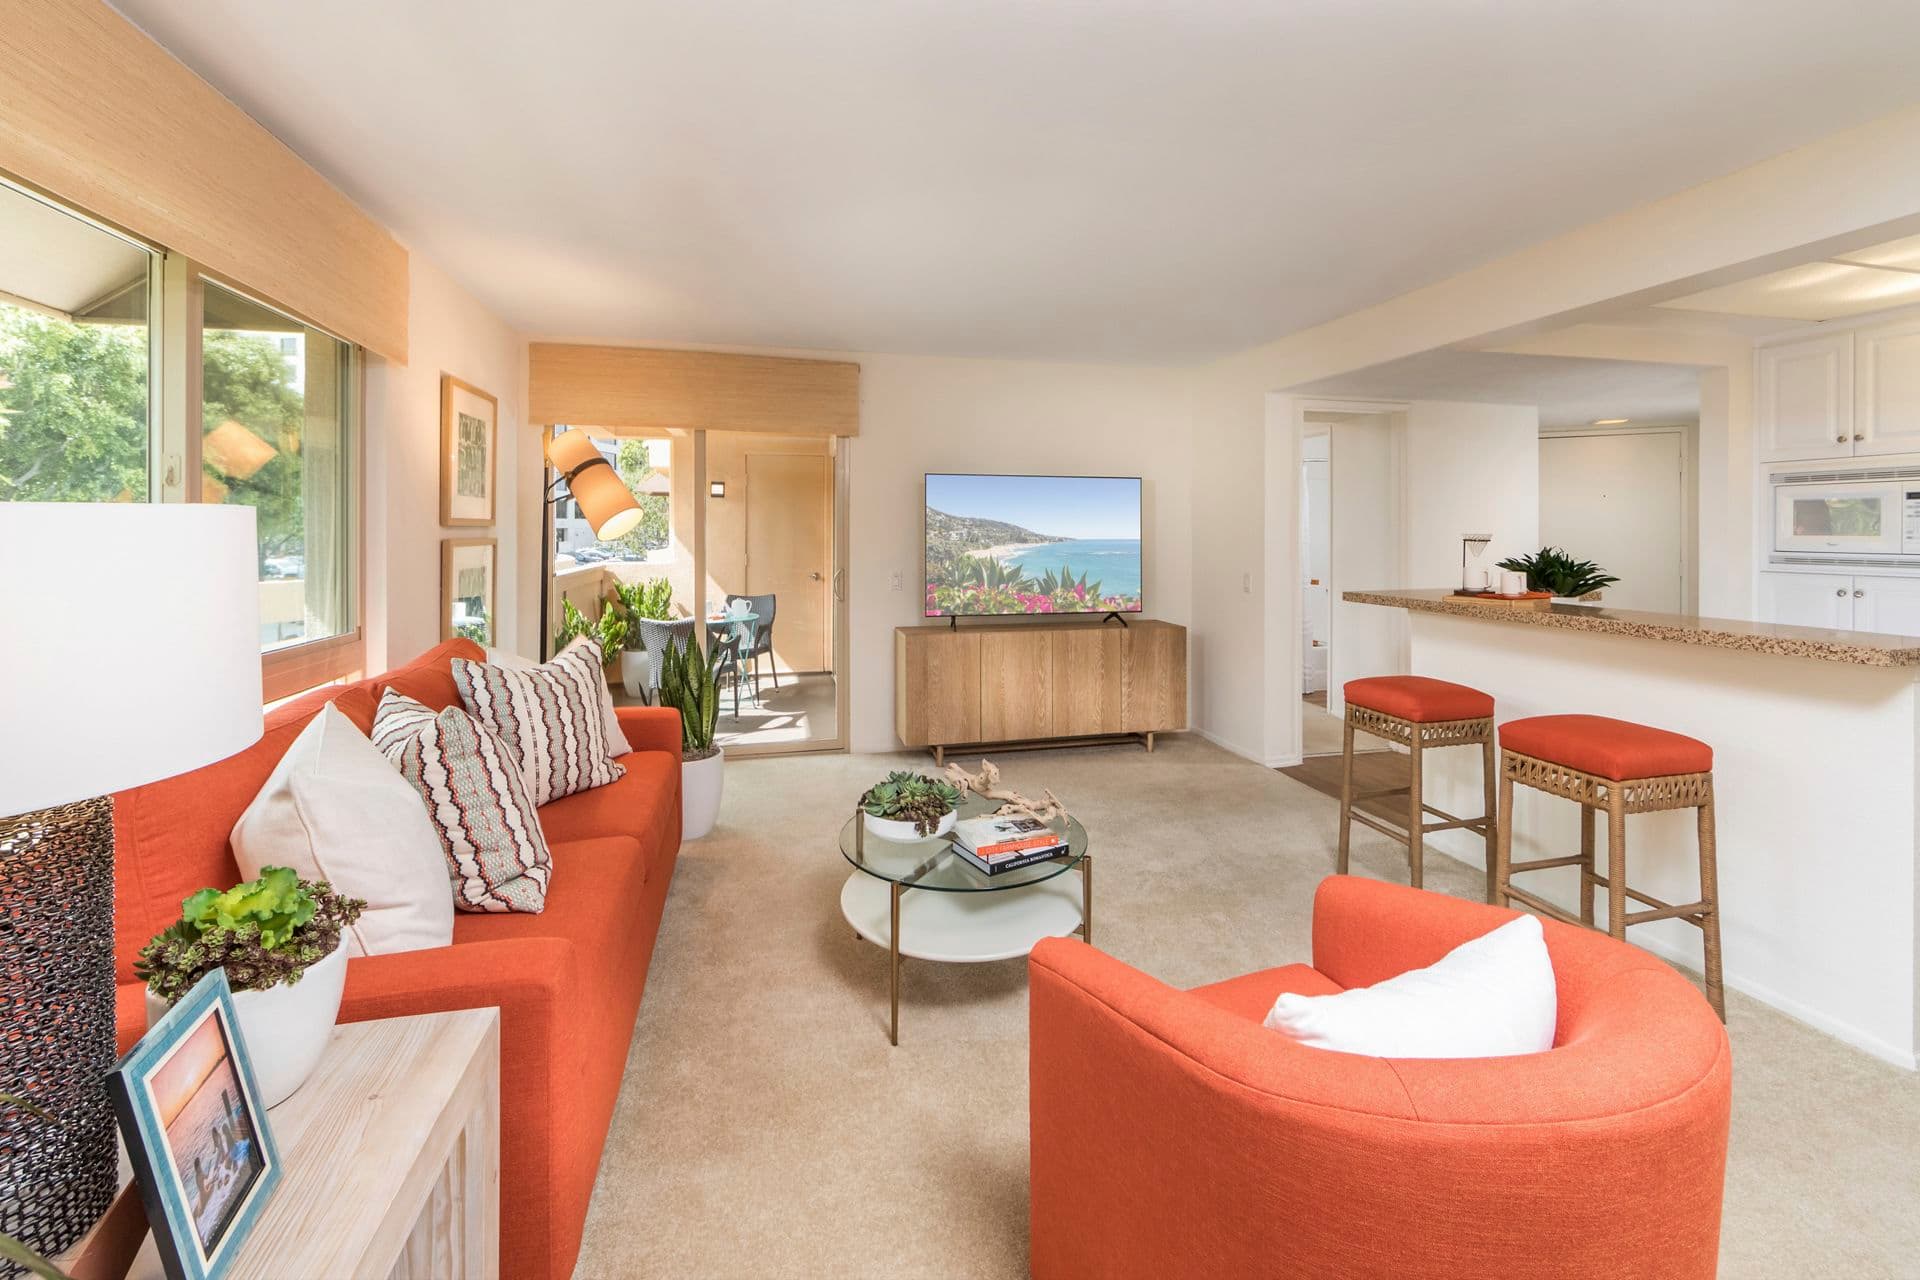 Interior view of living room at Dartmouth Court Apartment Homes at Town Center in Irvine, CA.